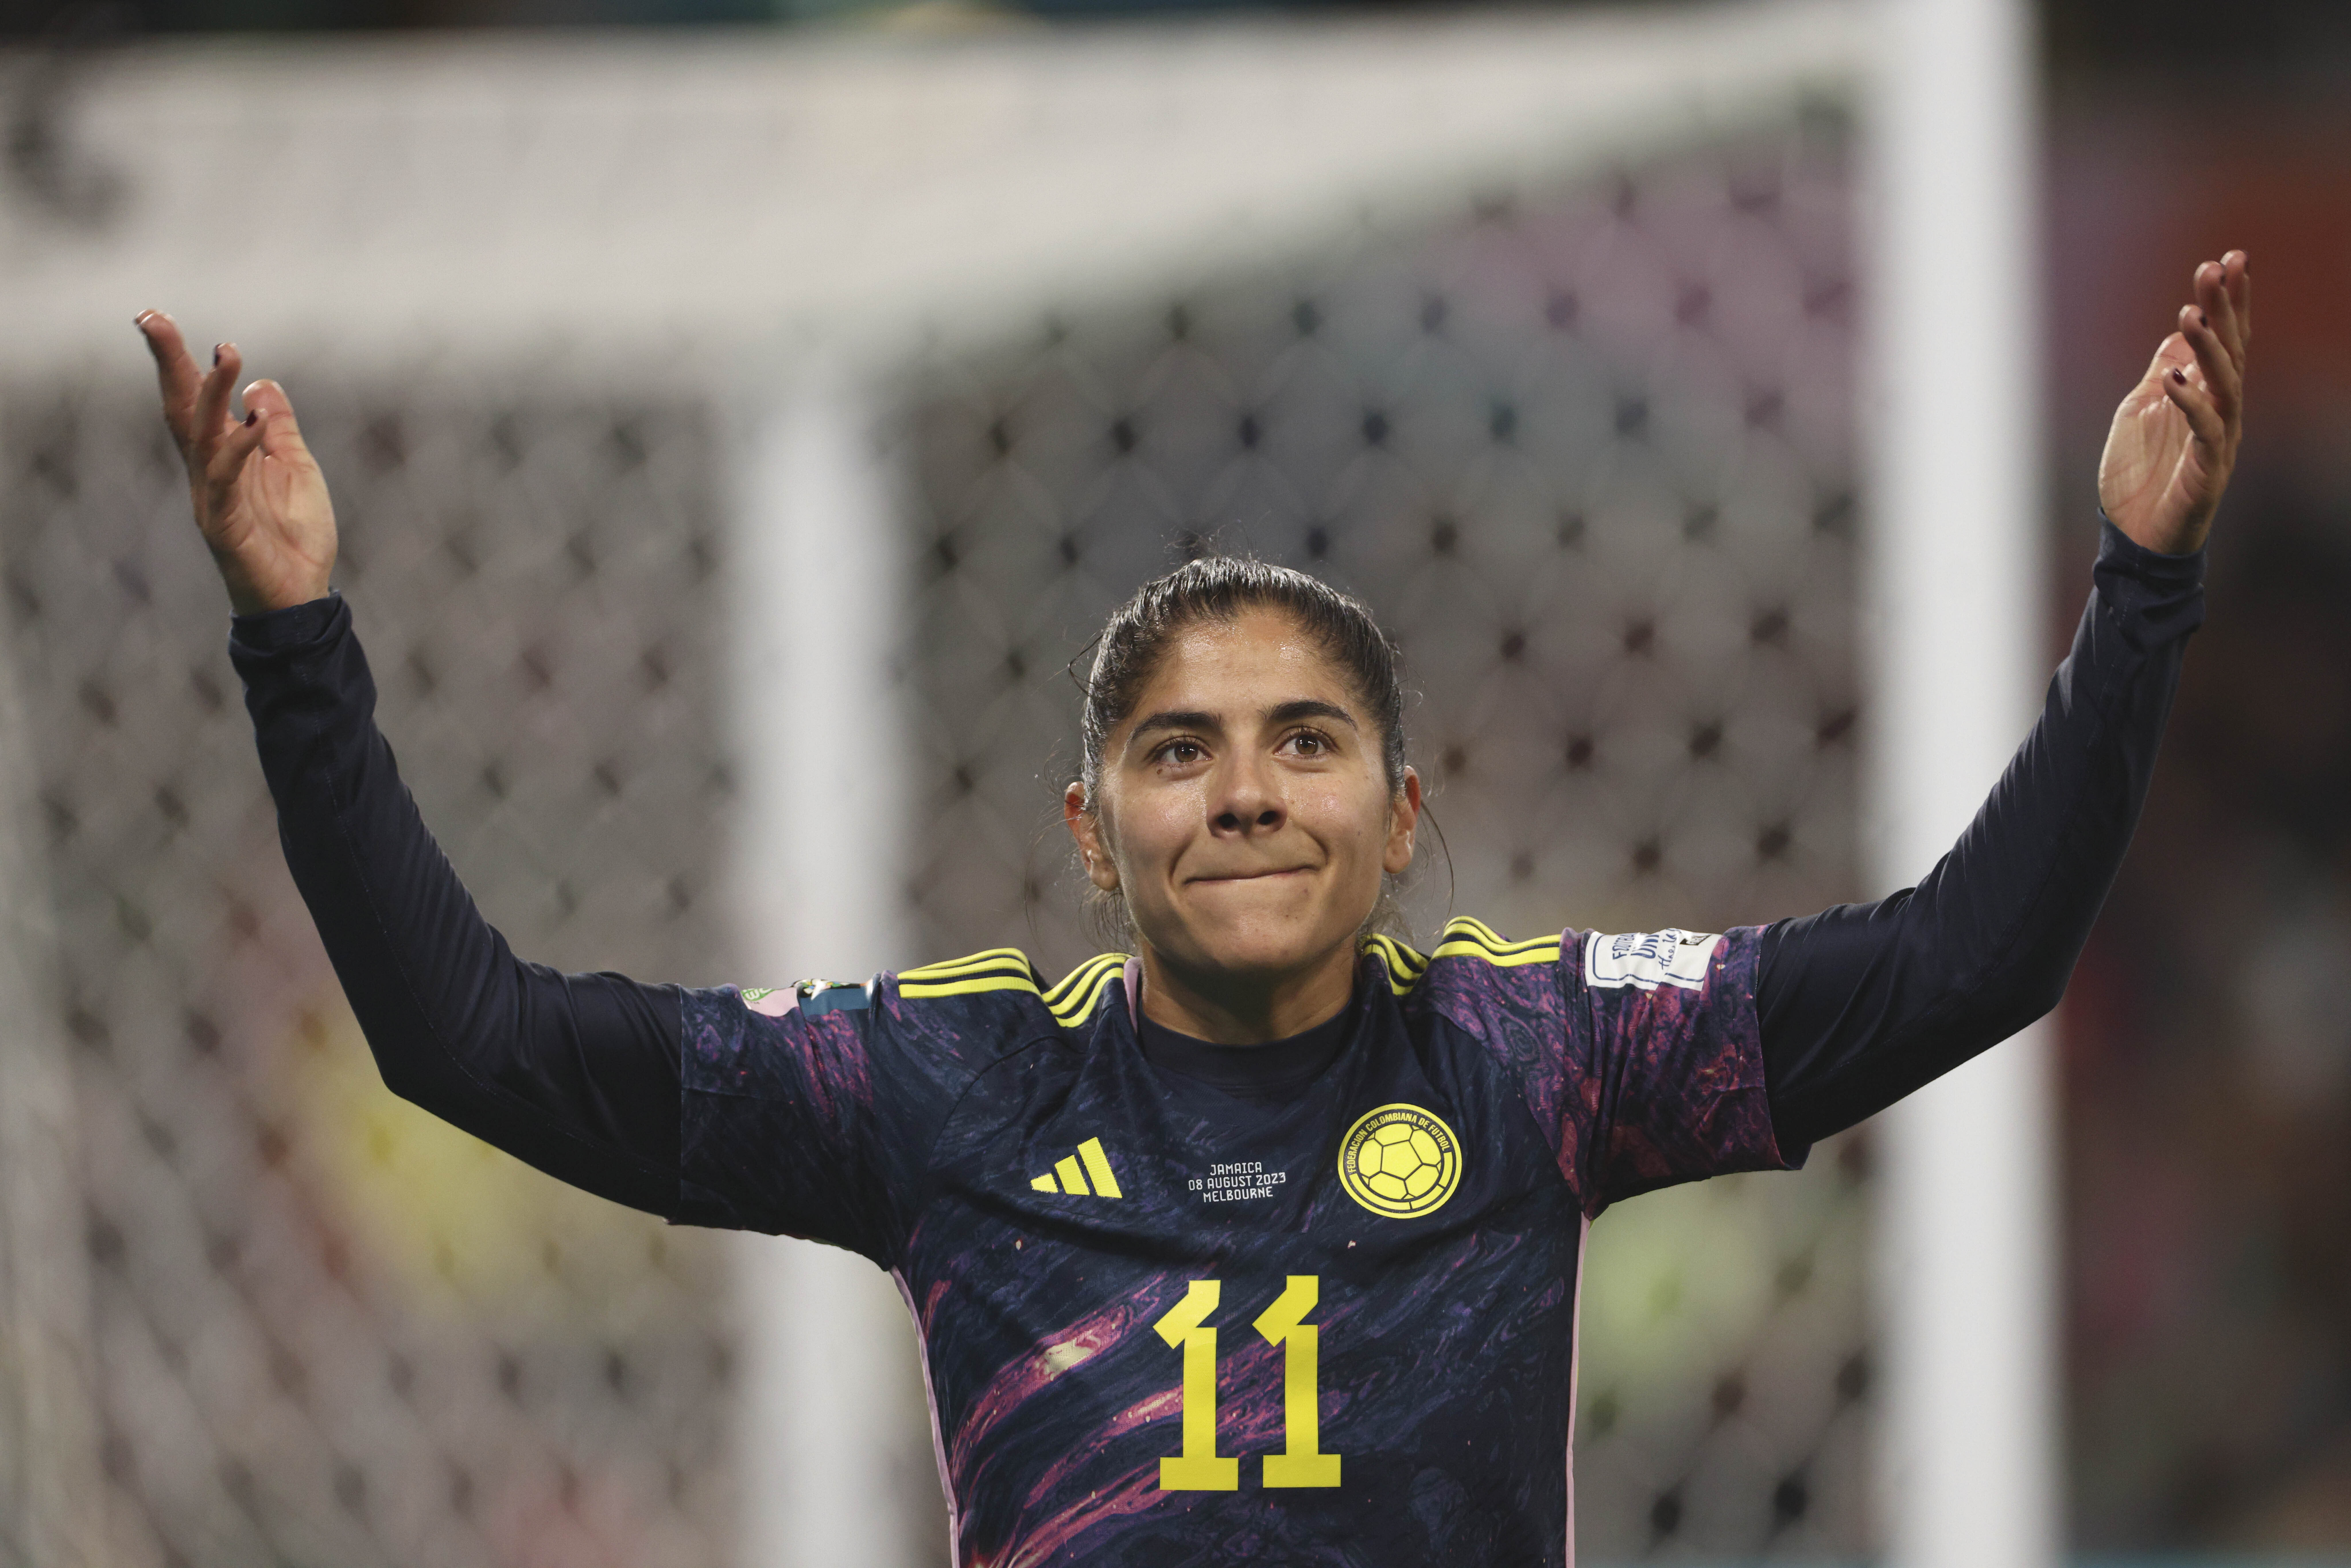 Her Football Hub – Covering the World of Women's Football